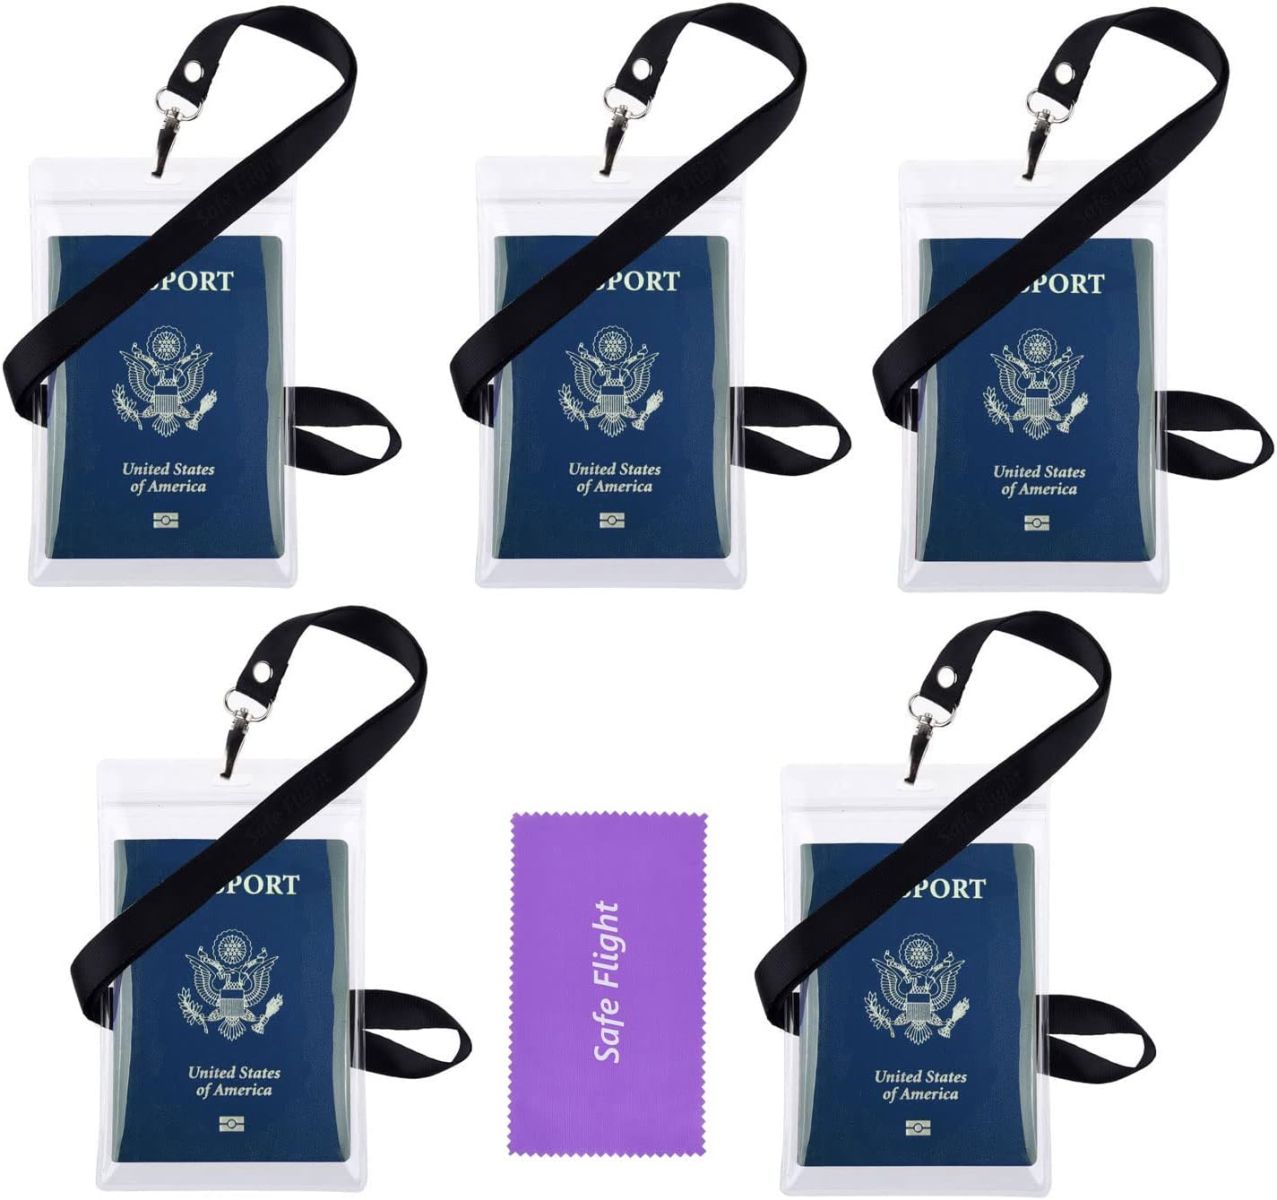 Neck Lanyard and Transparent Passport ID Badge Holder XL 6x4 - 5 Pack Bundle - Also for Cash, Credit Card, Plane Ticket, etc - Essential 'Handsfree' Travel Accessory - Black by Safe Flight